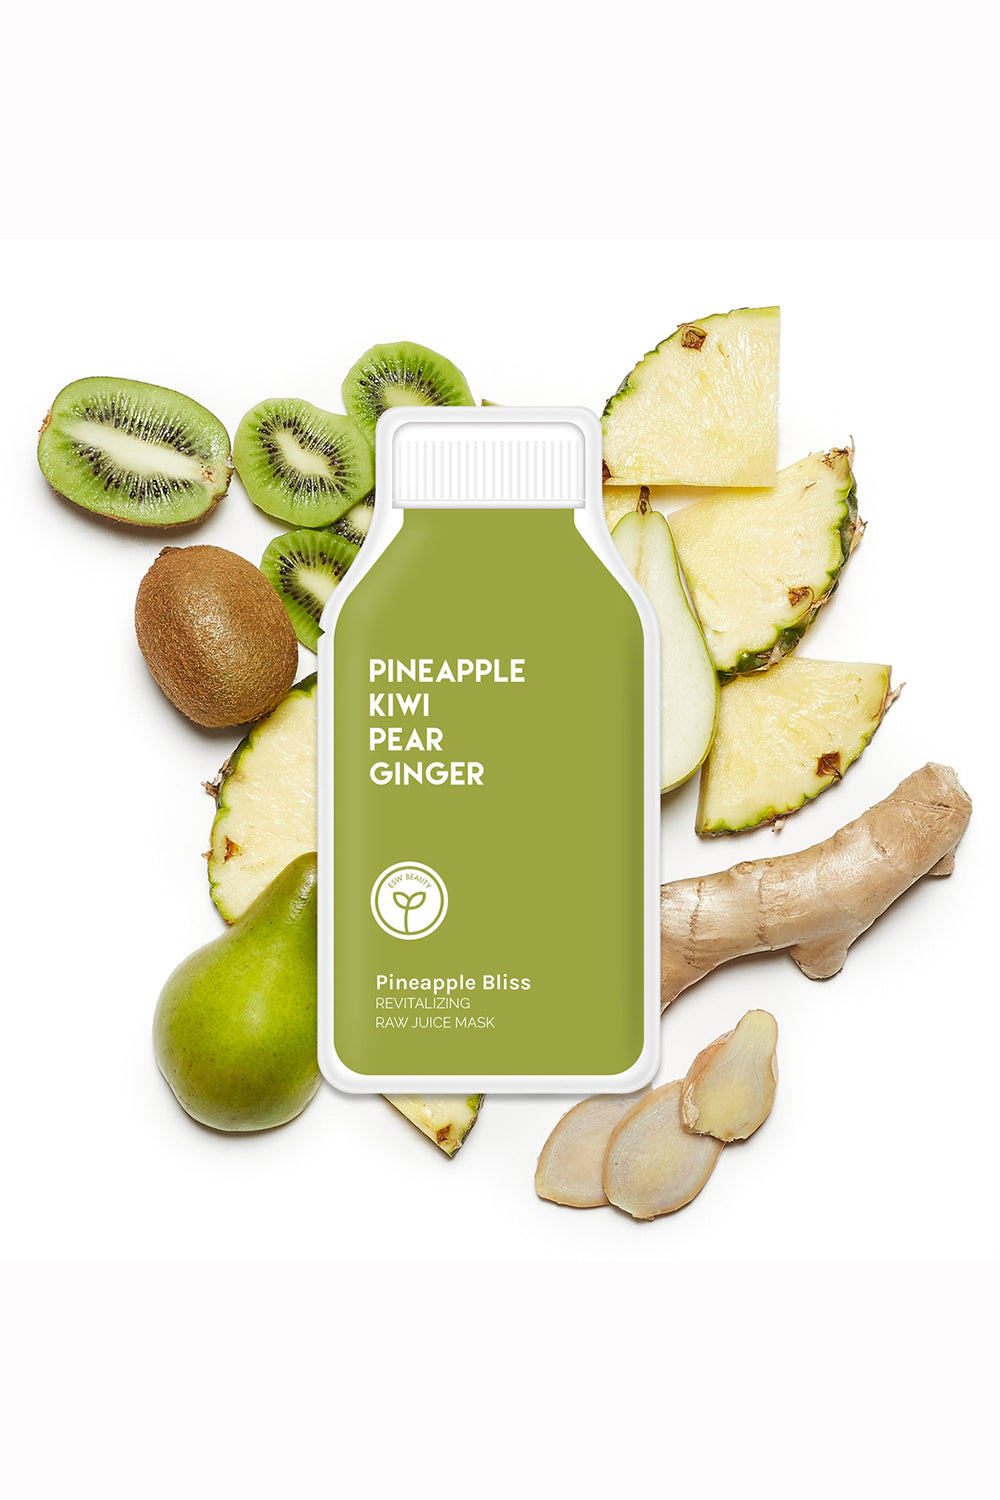 Juice Cleanse Facial Mask - Pineapple Bliss Revitalizing